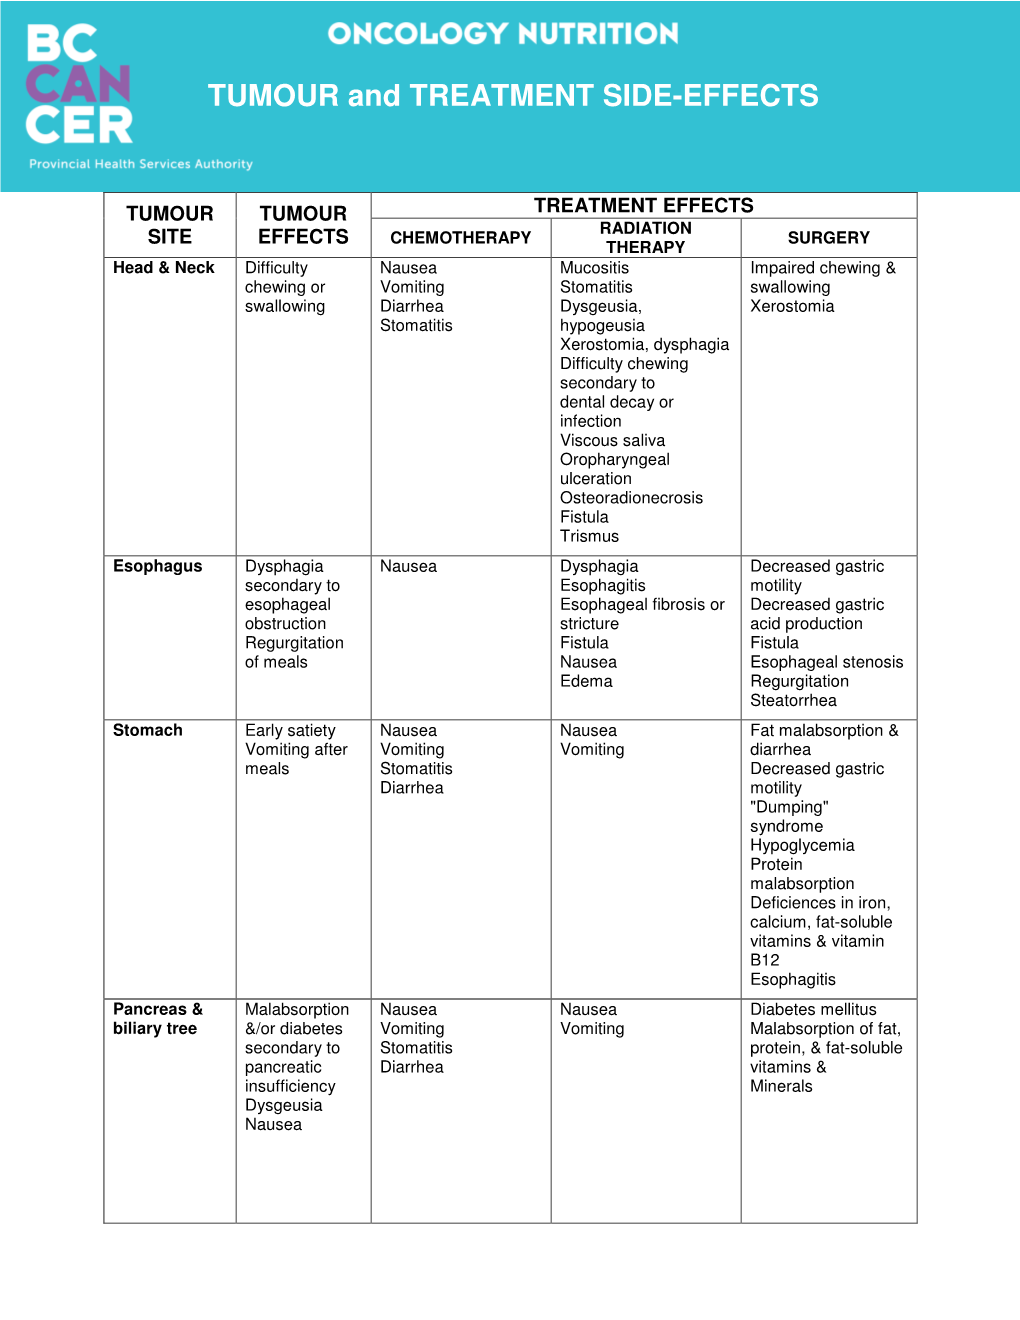 TUMOUR and TREATMENT SIDE-EFFECTS